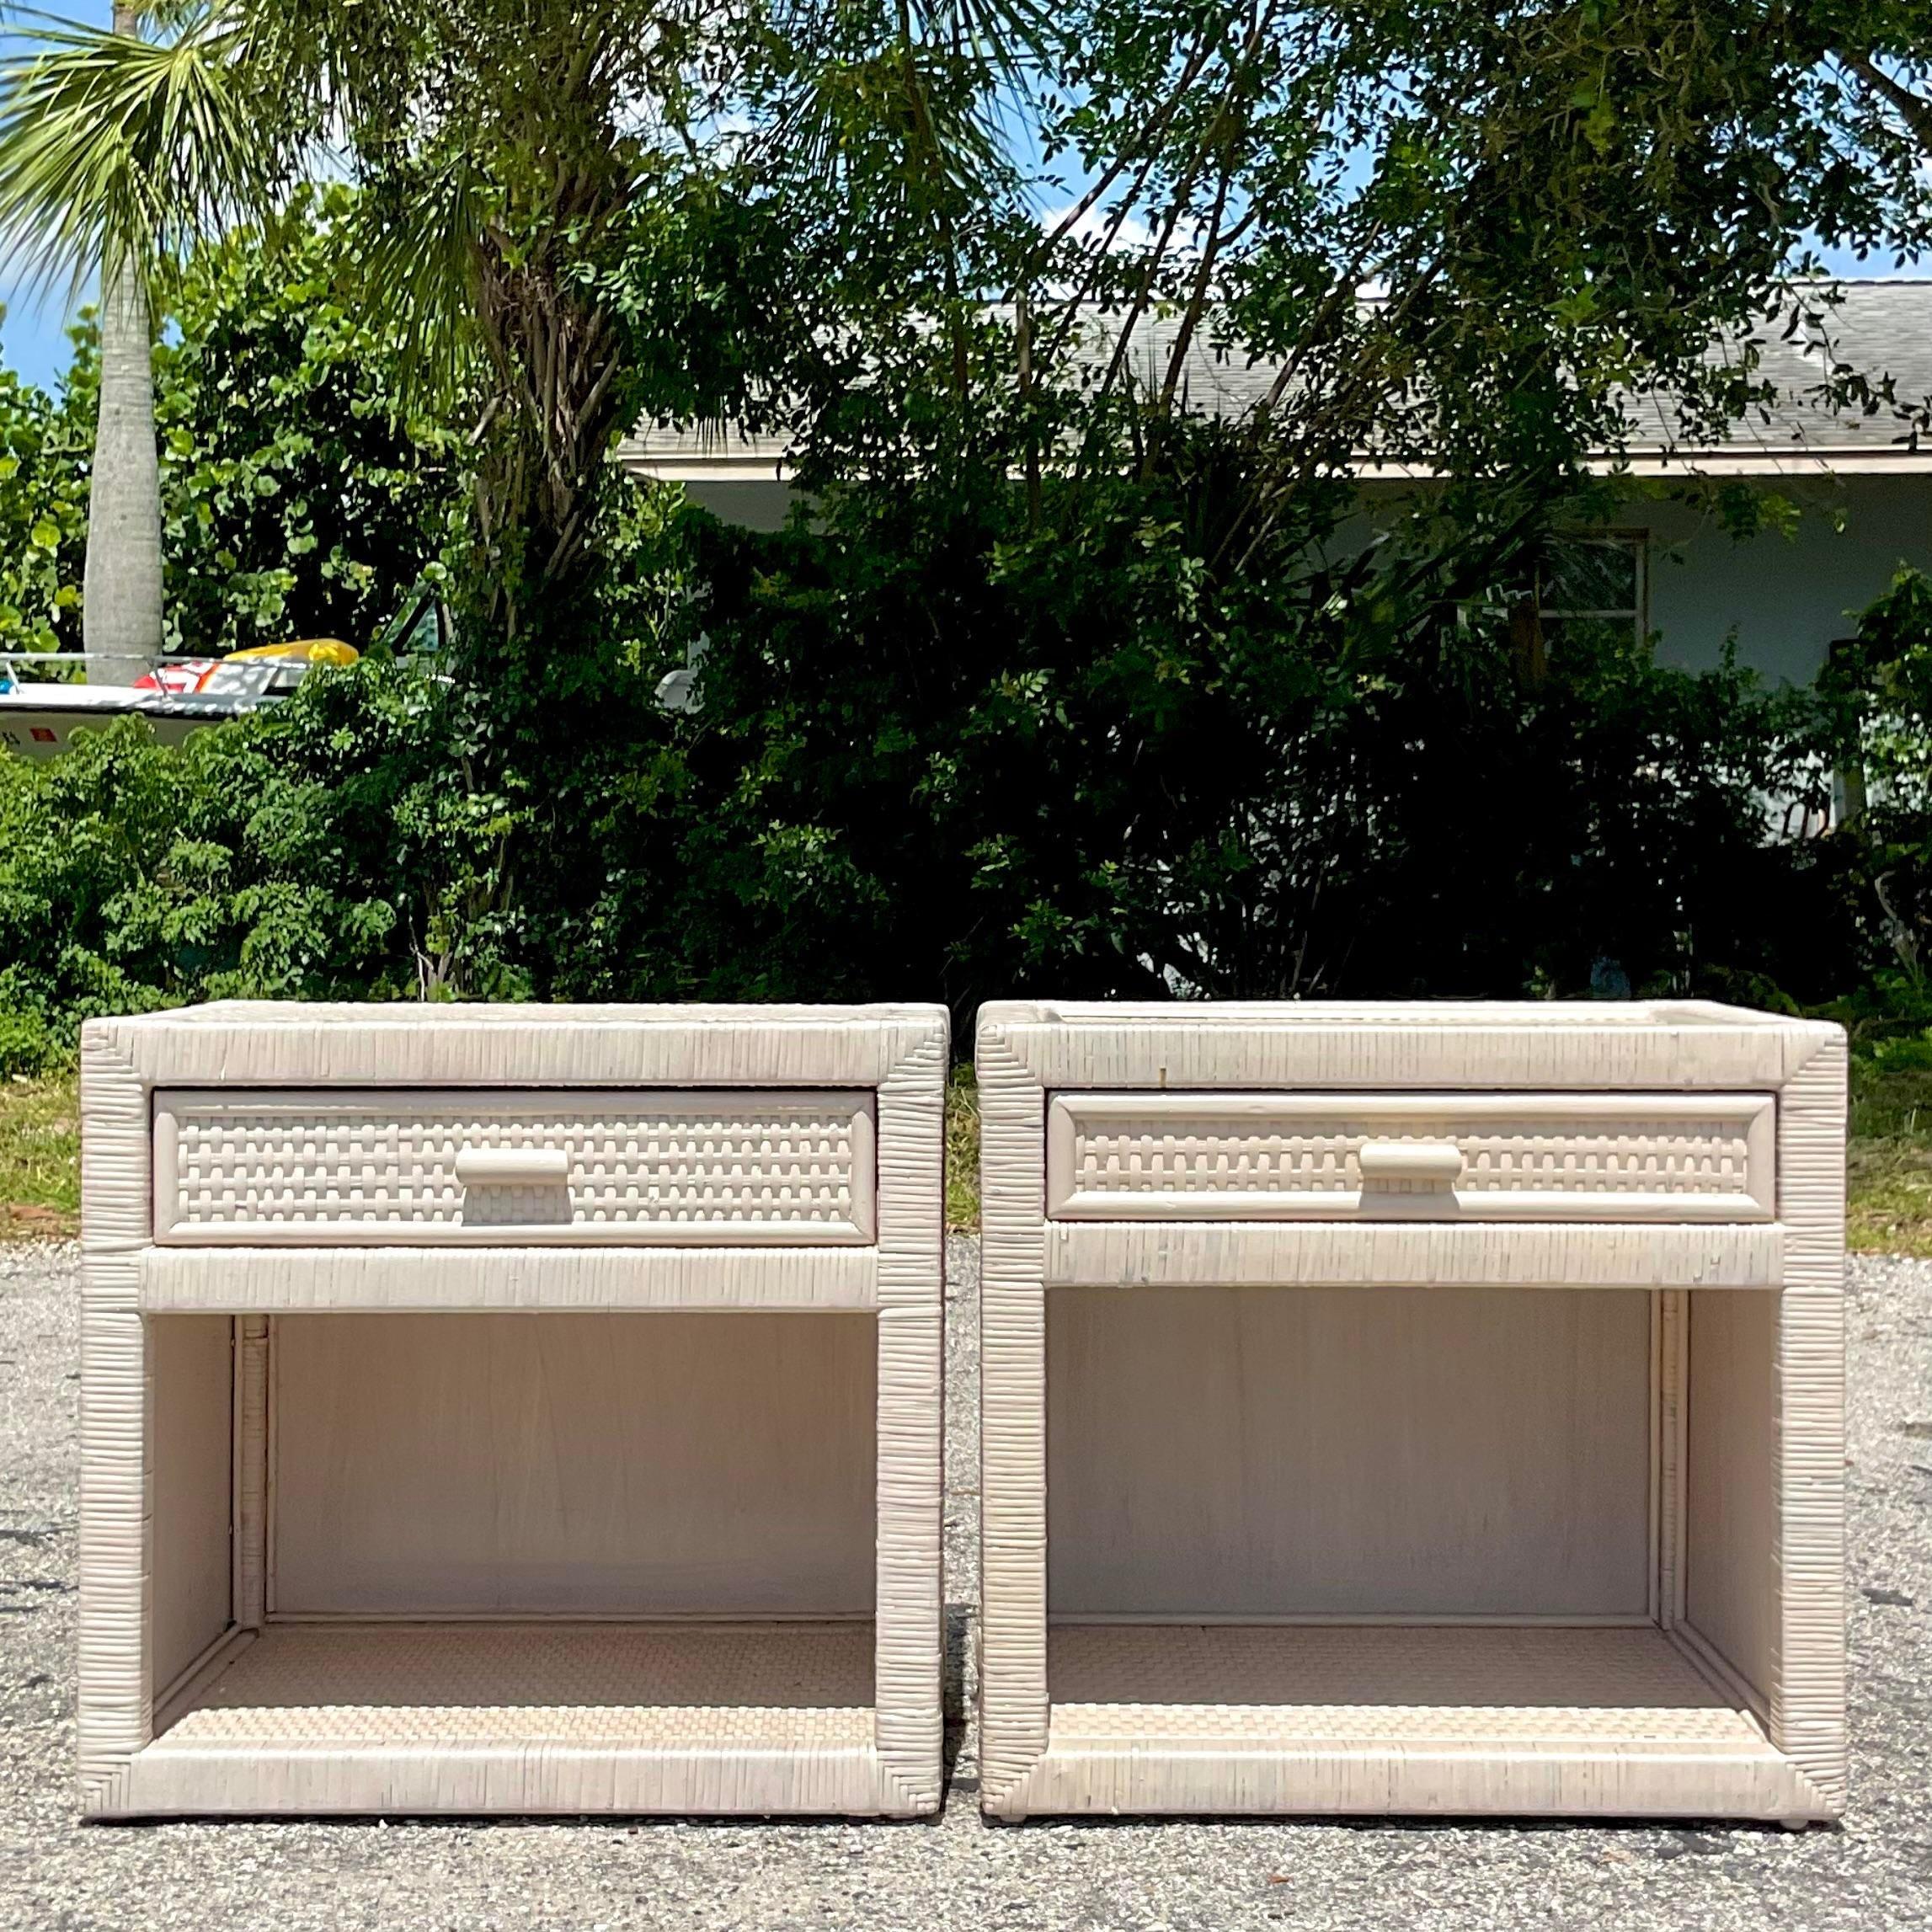 A fabulous pair of vintage Coastal nightstands. Chic cerused rattan in a wrapped and woven design. Lots of great storage below and one drawer each. Acquired from a Palm Beach estate.